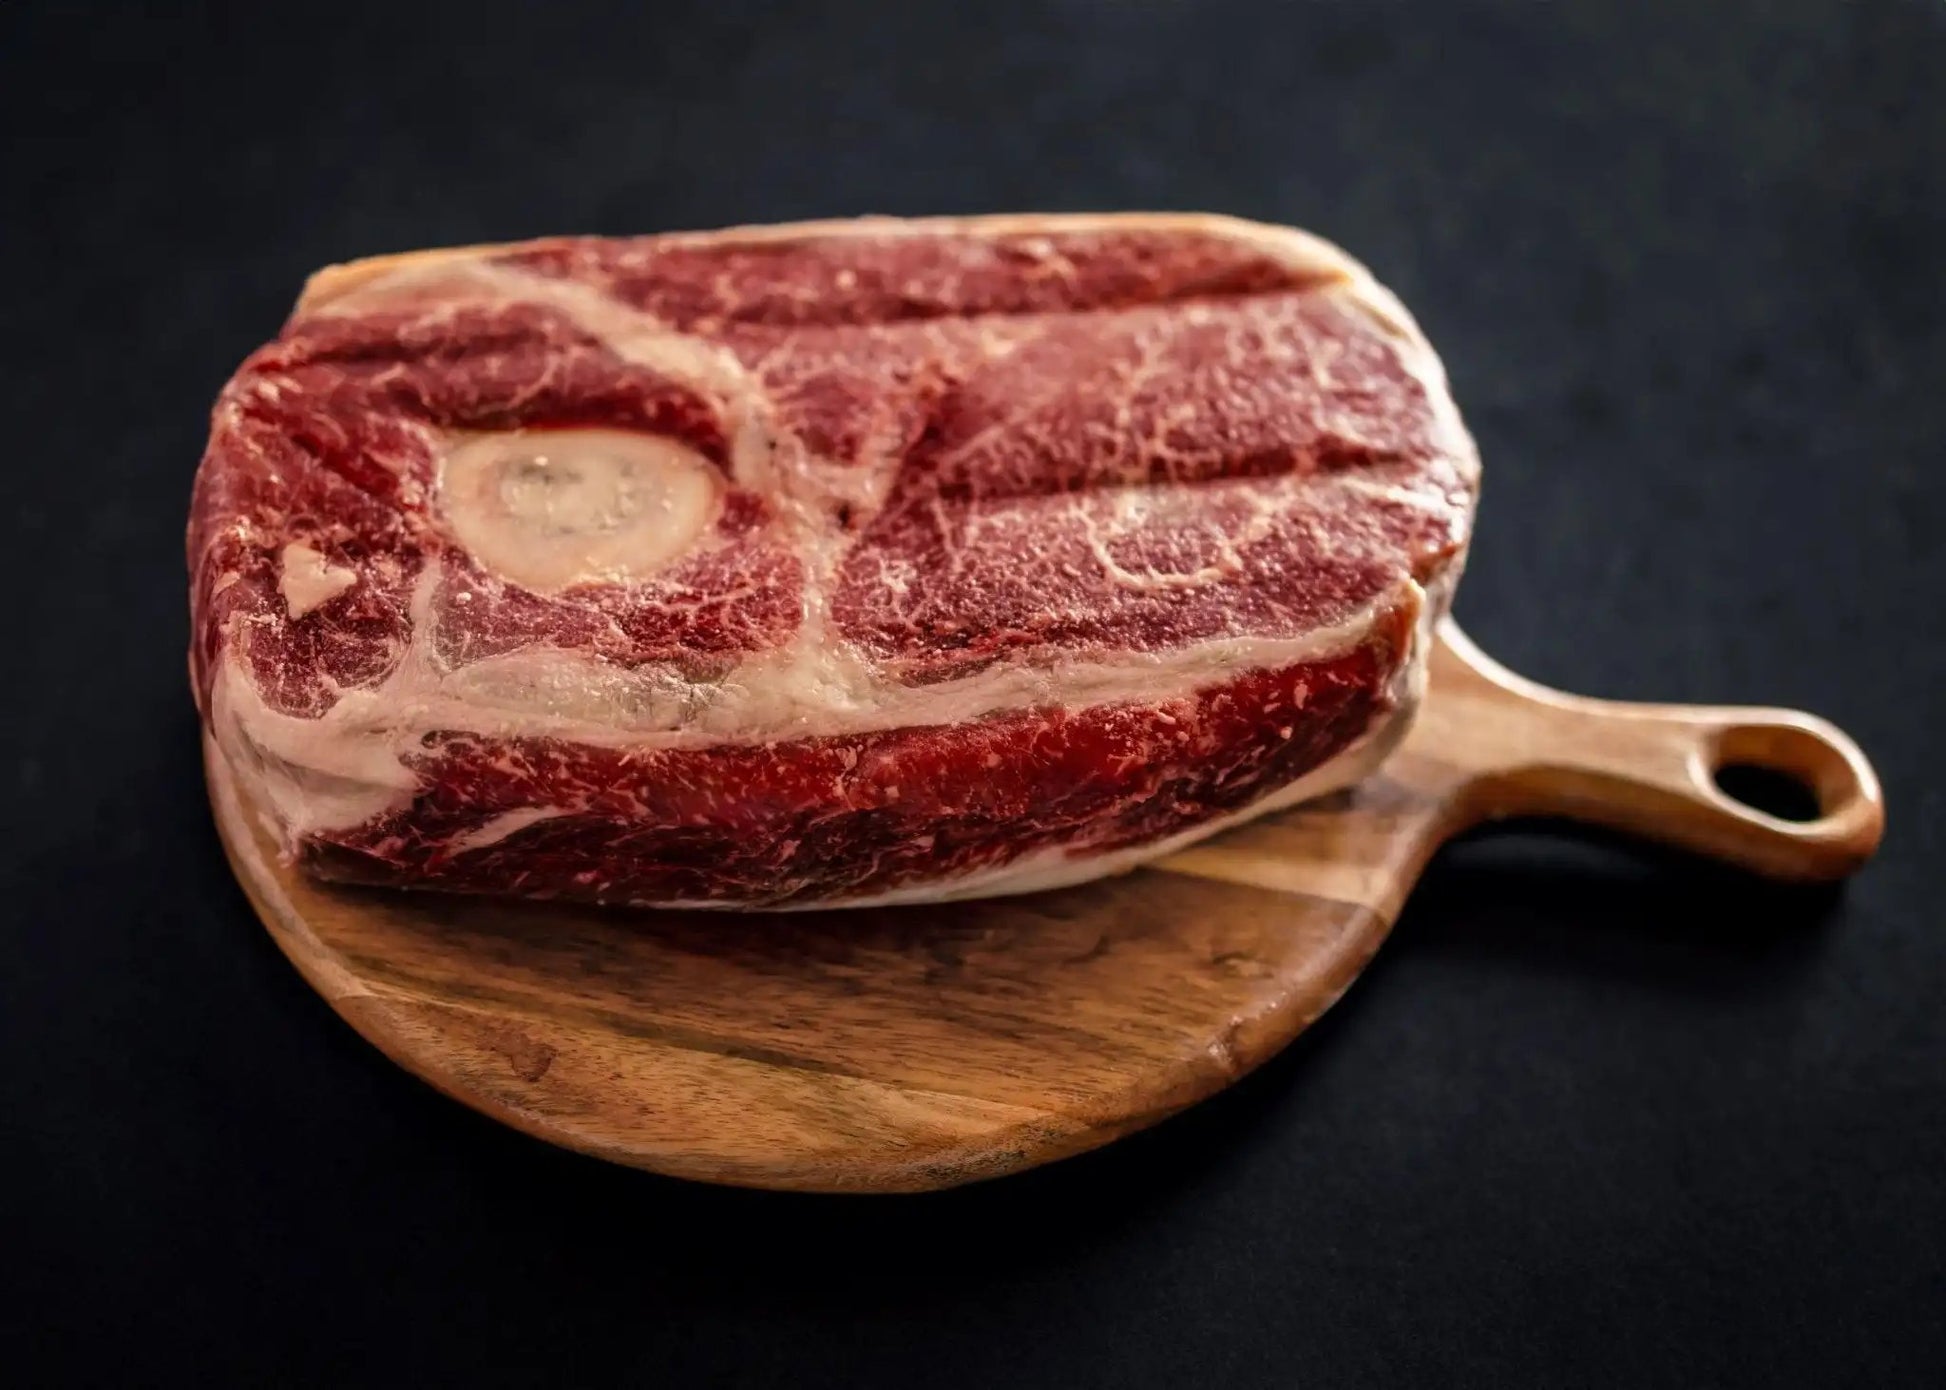 100% All-Natural Grass-Fed Pasture-Raised Wagyu Arm RoastIntroducing Hufeisen Ranch's 100% All-Natural Grass-Fed Pasture-Raised Wagyu Arm Roast, the perfect cut for succulent and flavorful dishes. This primal cut is source100%The Hufeisen-Ranch (WYO Wagyu)